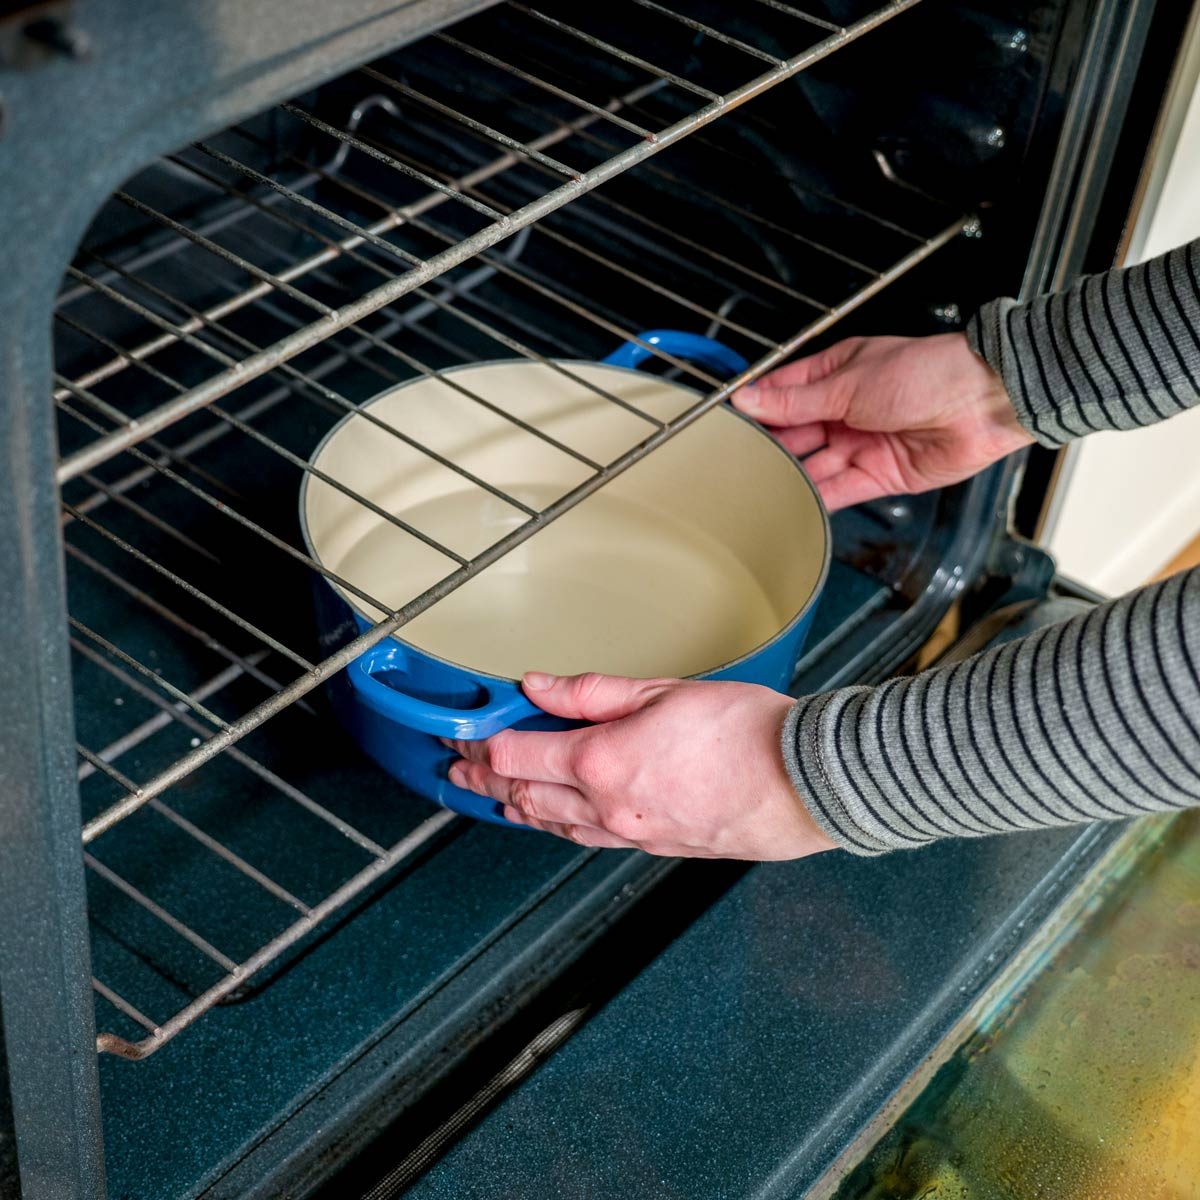 How to use the Steam Cleaning feature to clean your Oven